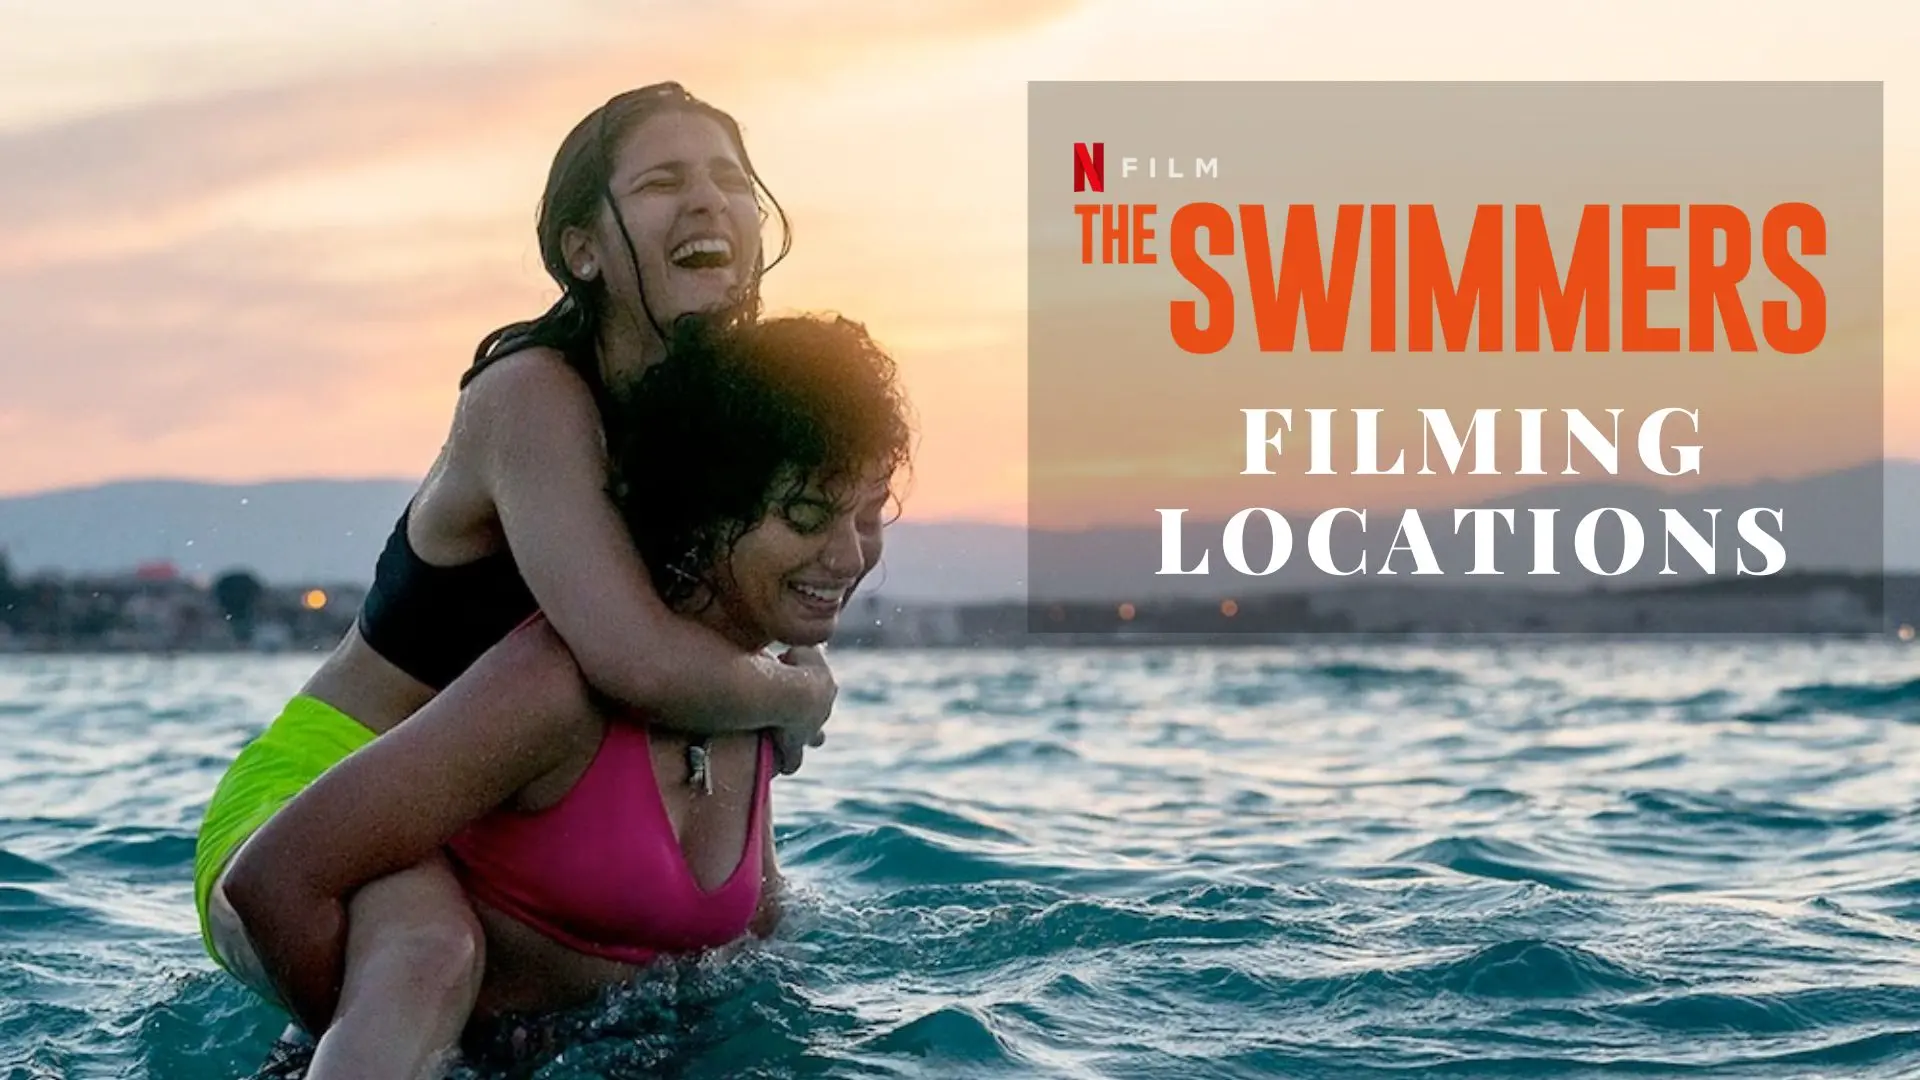 The Swimmers Filming Locations